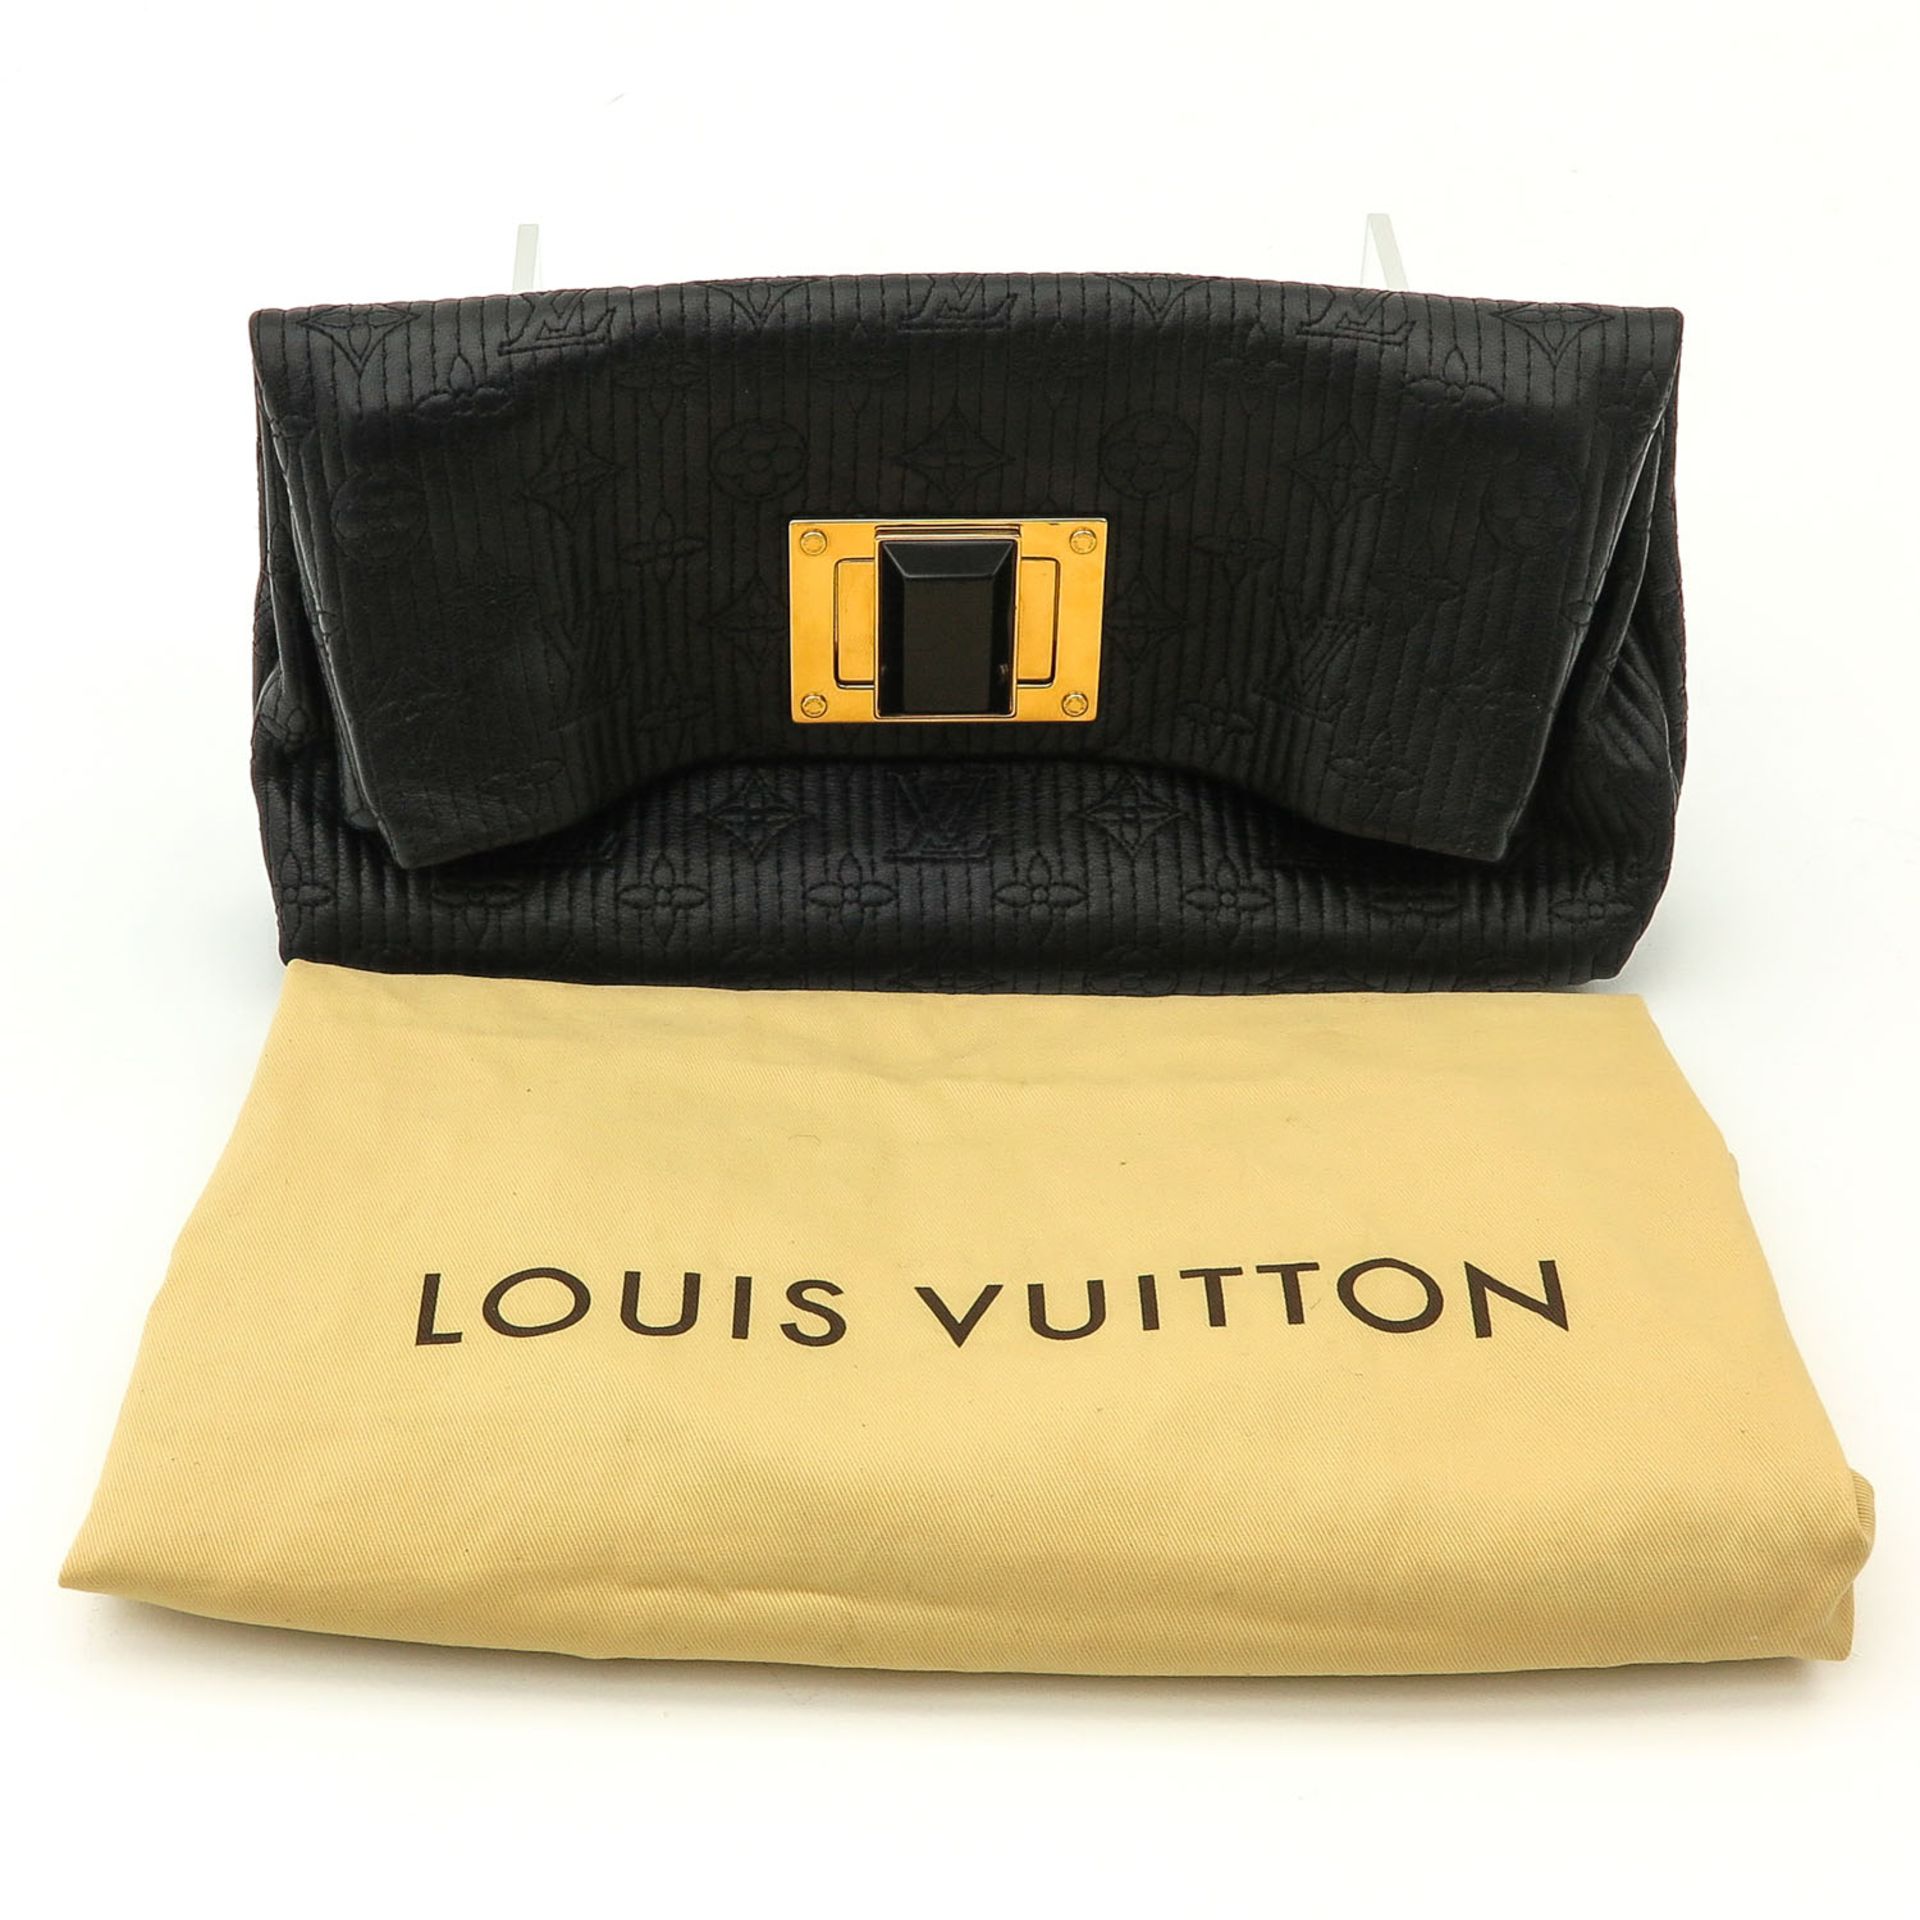 A Louis Vuitton Limited Edition Clutch - Image 7 of 7